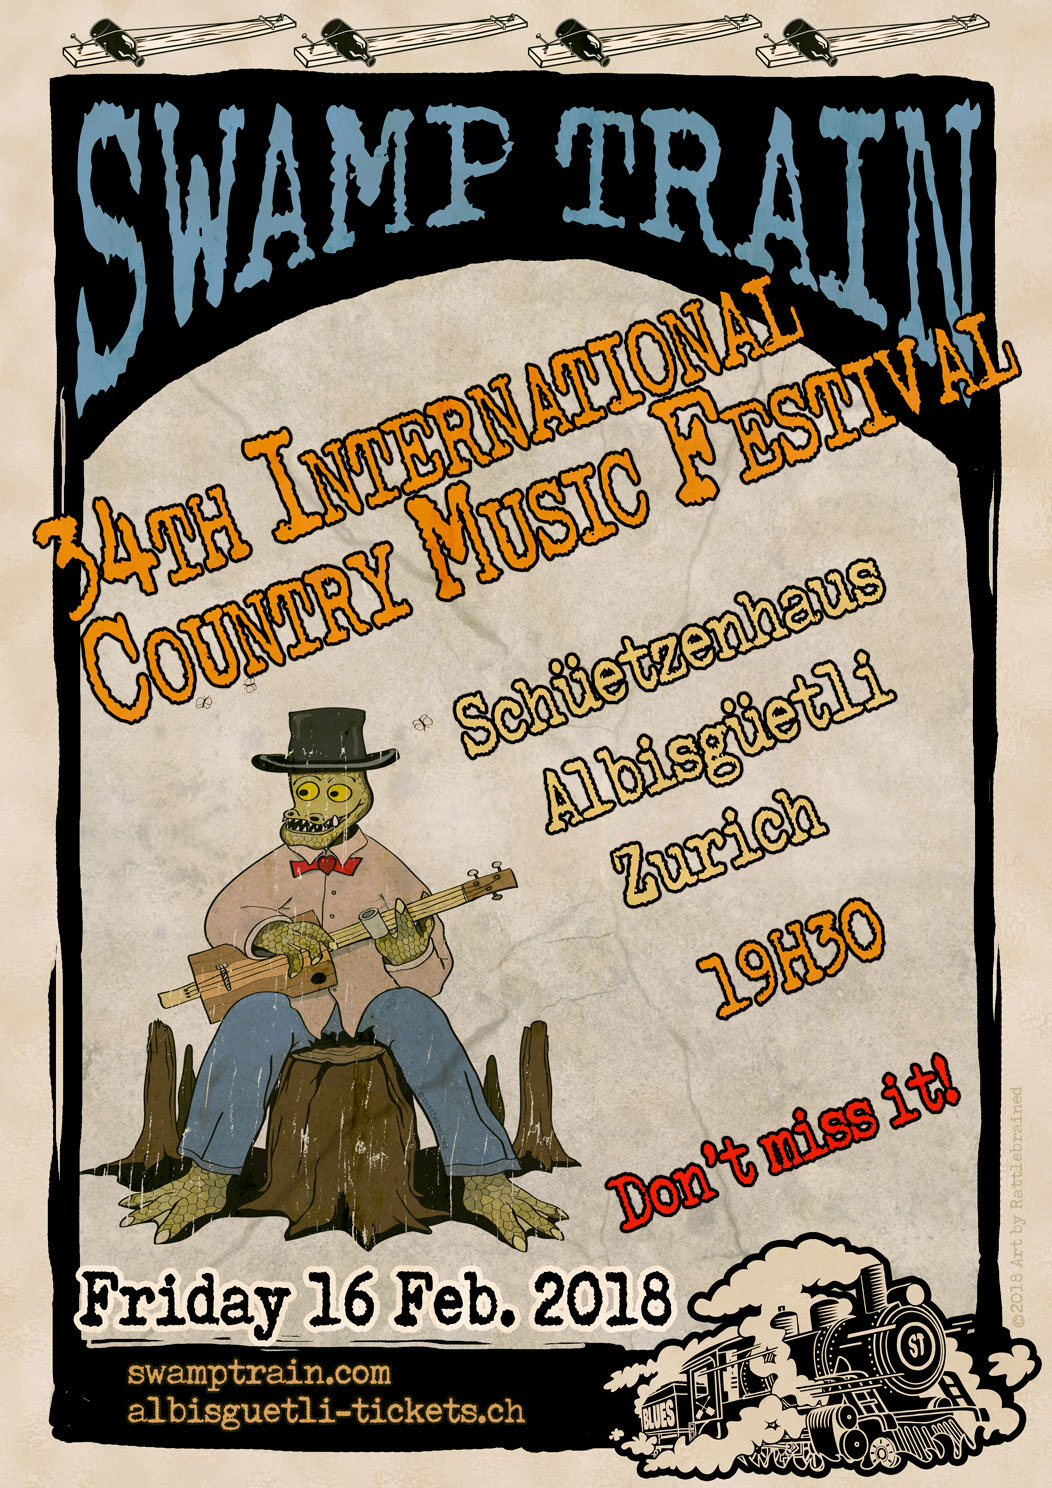 Flier for Swamp Train @ the 34th Country Music Festival in Zurich